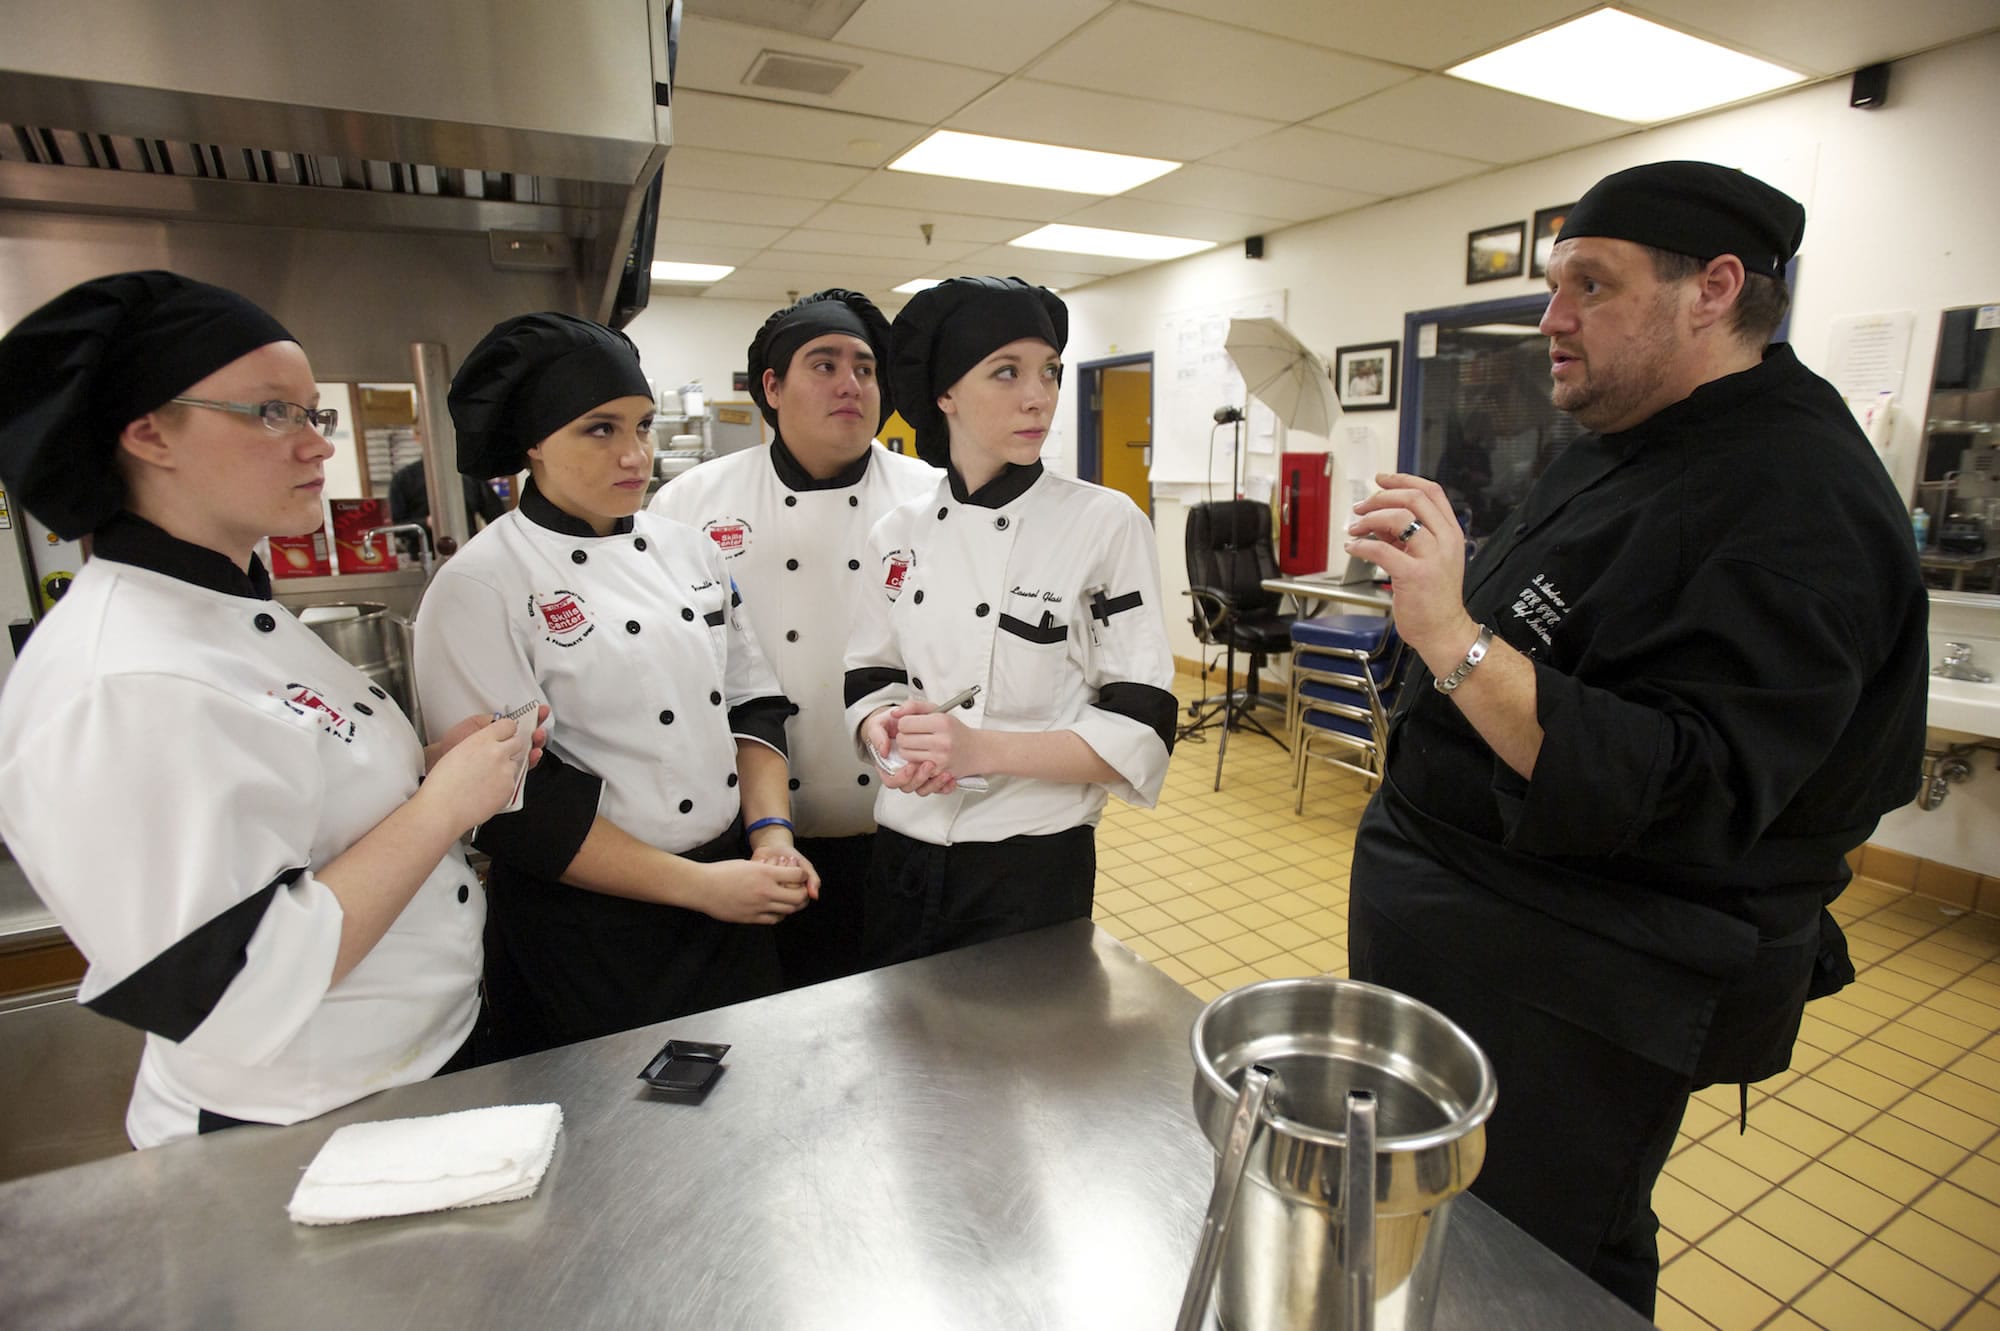 Chef R. Andrew McColley instructs students about the task of preparing 7,500 Washington-inspired hors d'oeuvres. About 30 students and McColley will deliver the food via school bus to Olympia today.